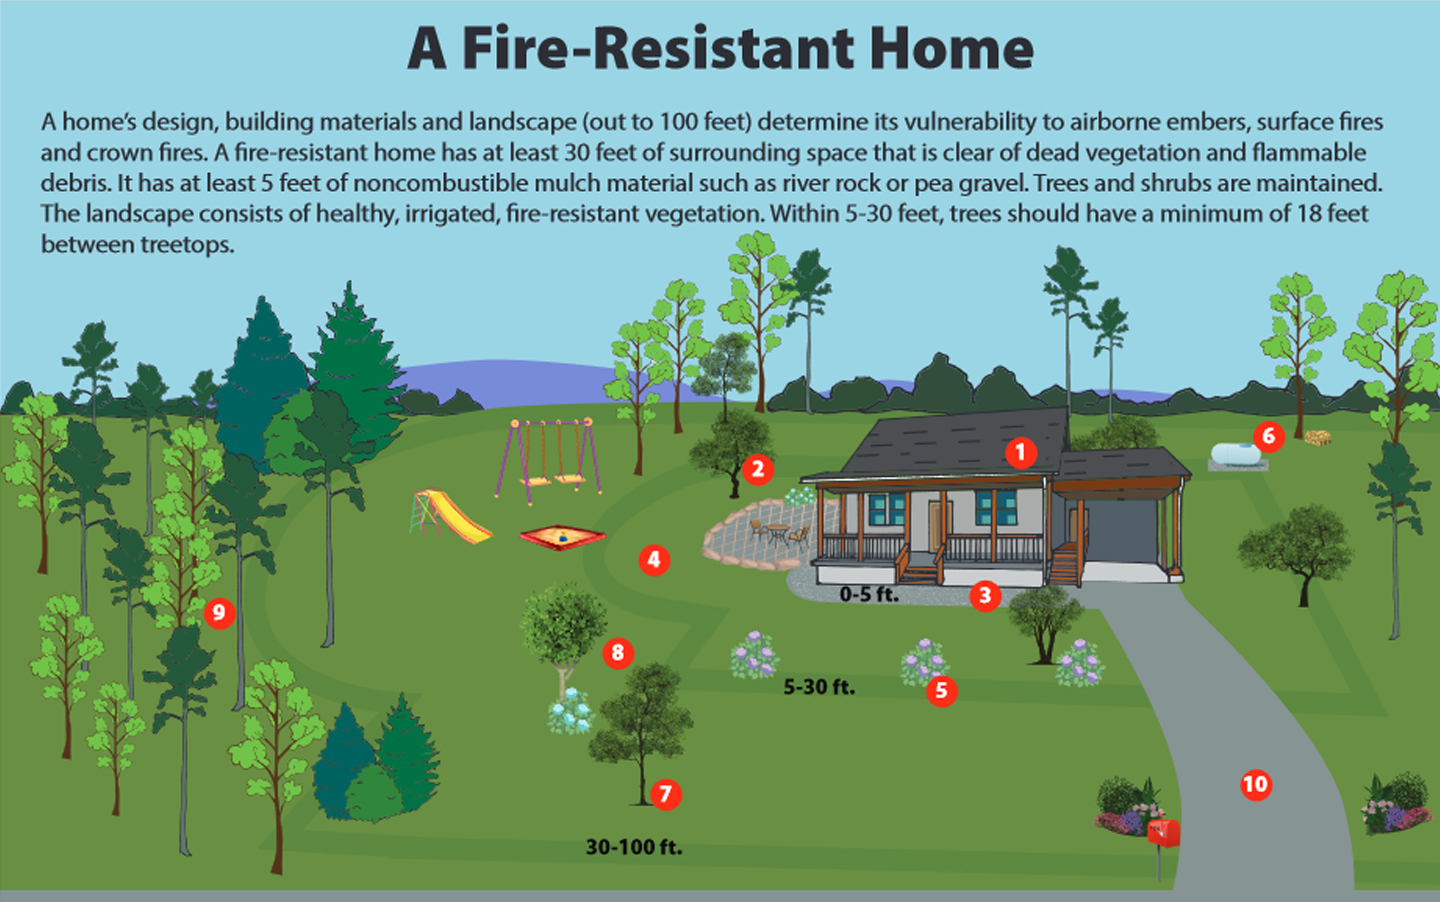 A Fire-Resistant Home graphic